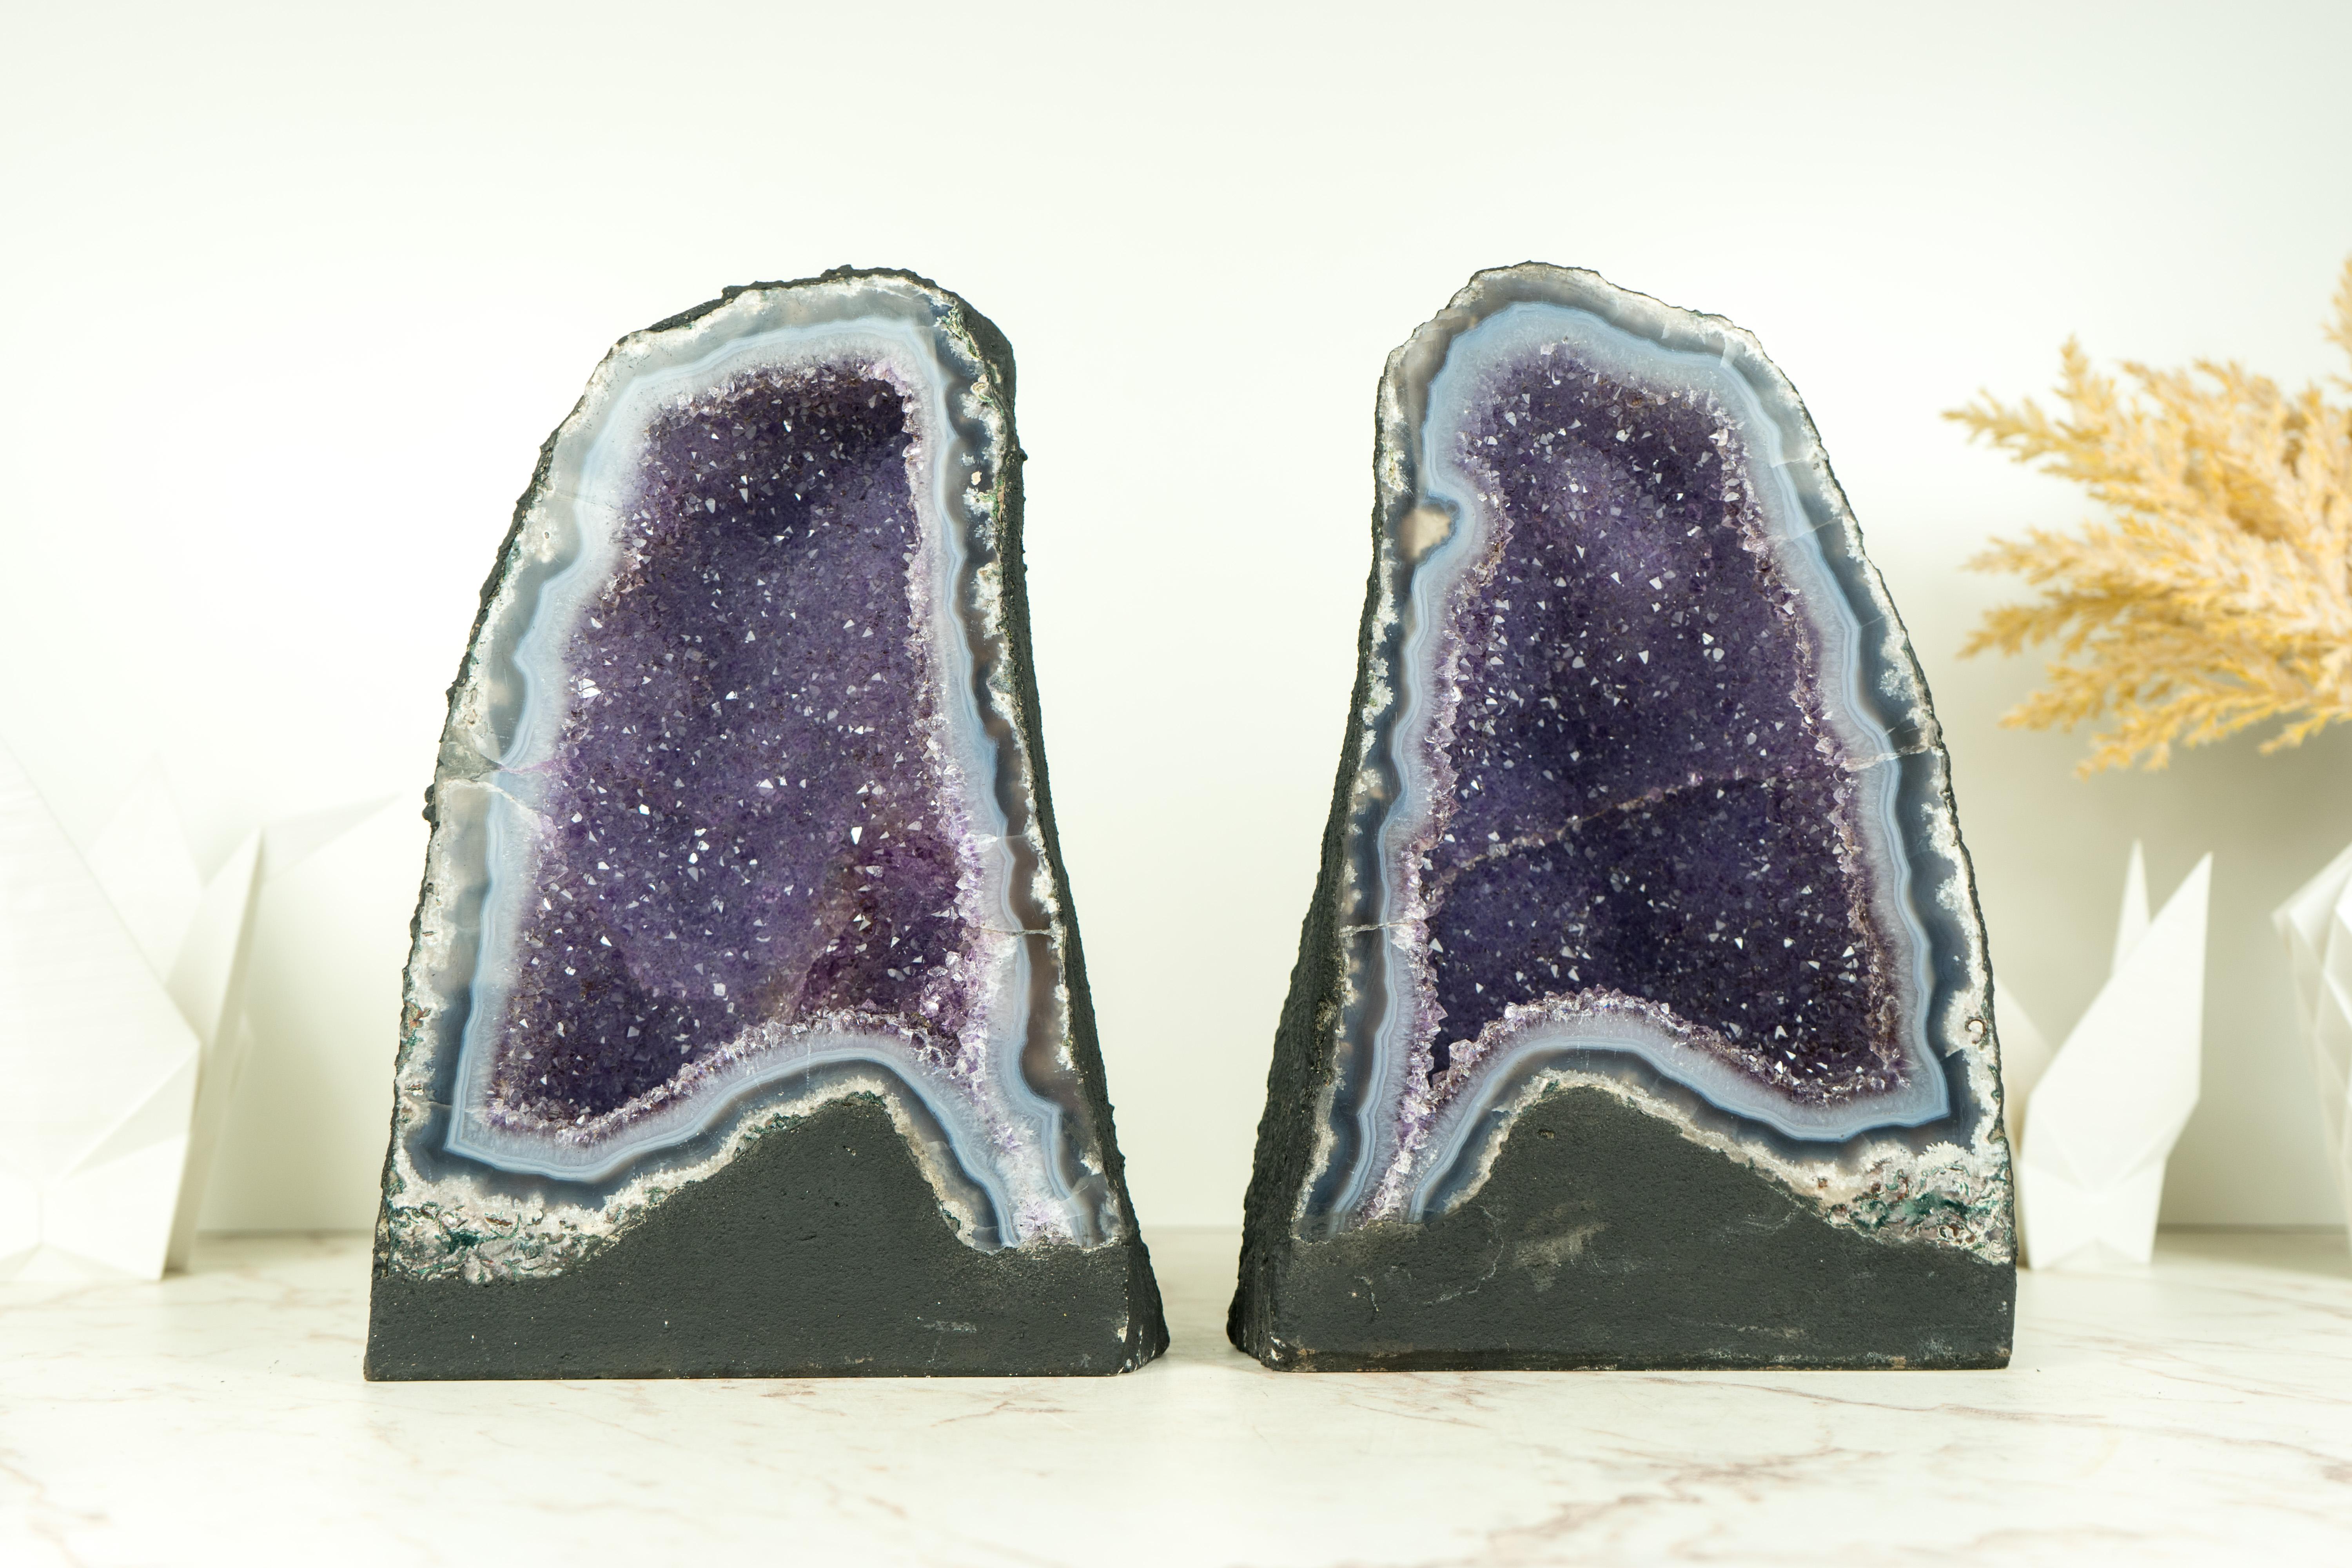 Pair of High-Grade Small Blue Lace Agate Geodes with Sparkly Lavender Amethyst For Sale 8